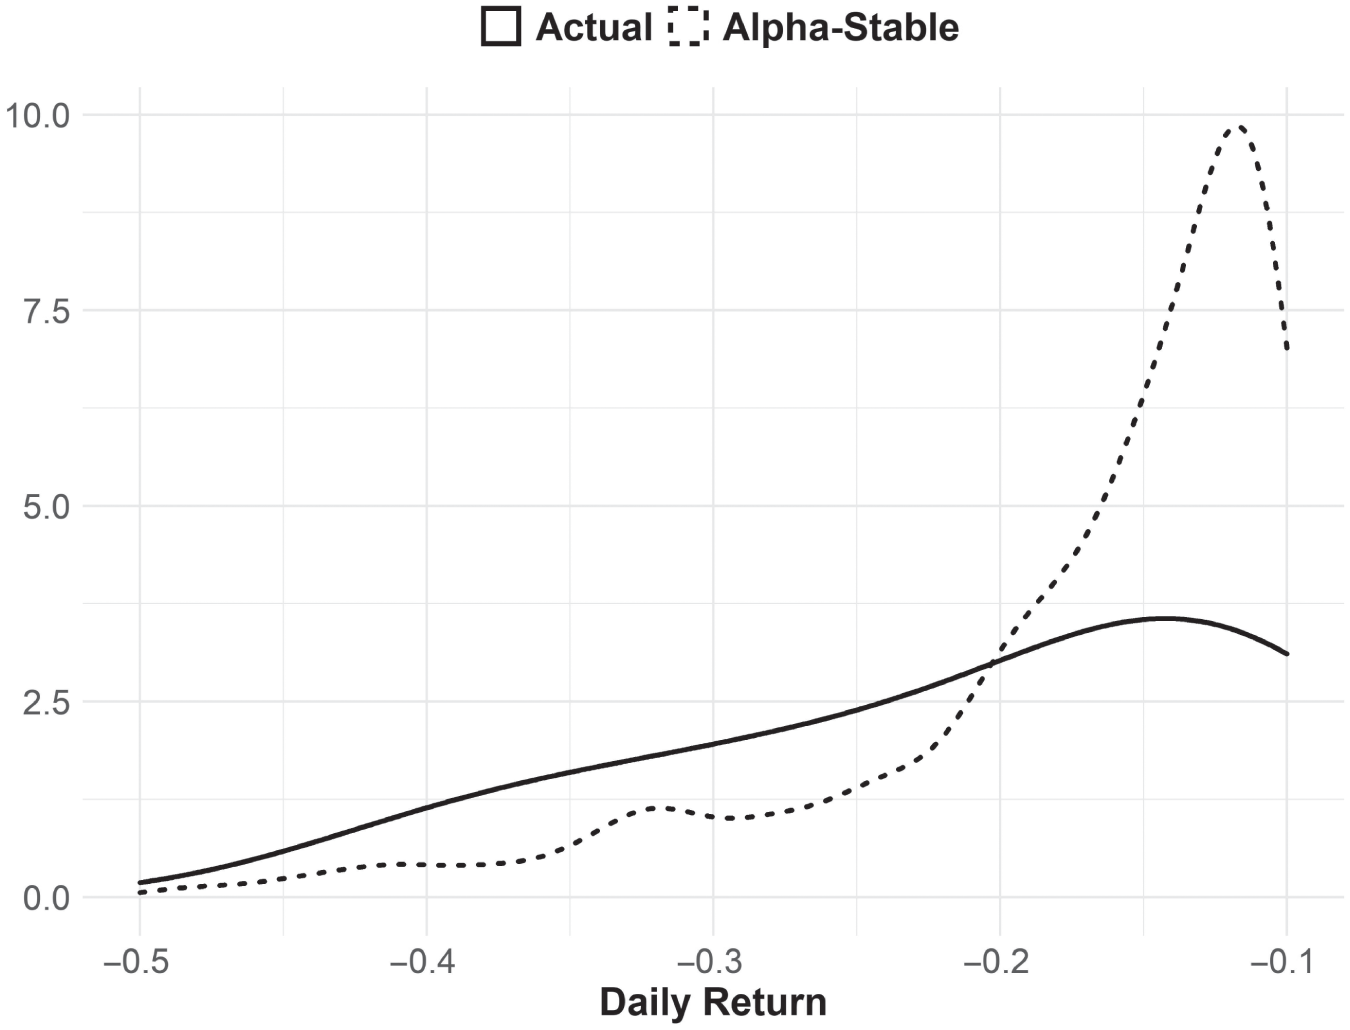 Schematic illustration of Daily S&P 500 Returns in the Left Tail Compared to Alpha-Stable and Gaussian Distributions